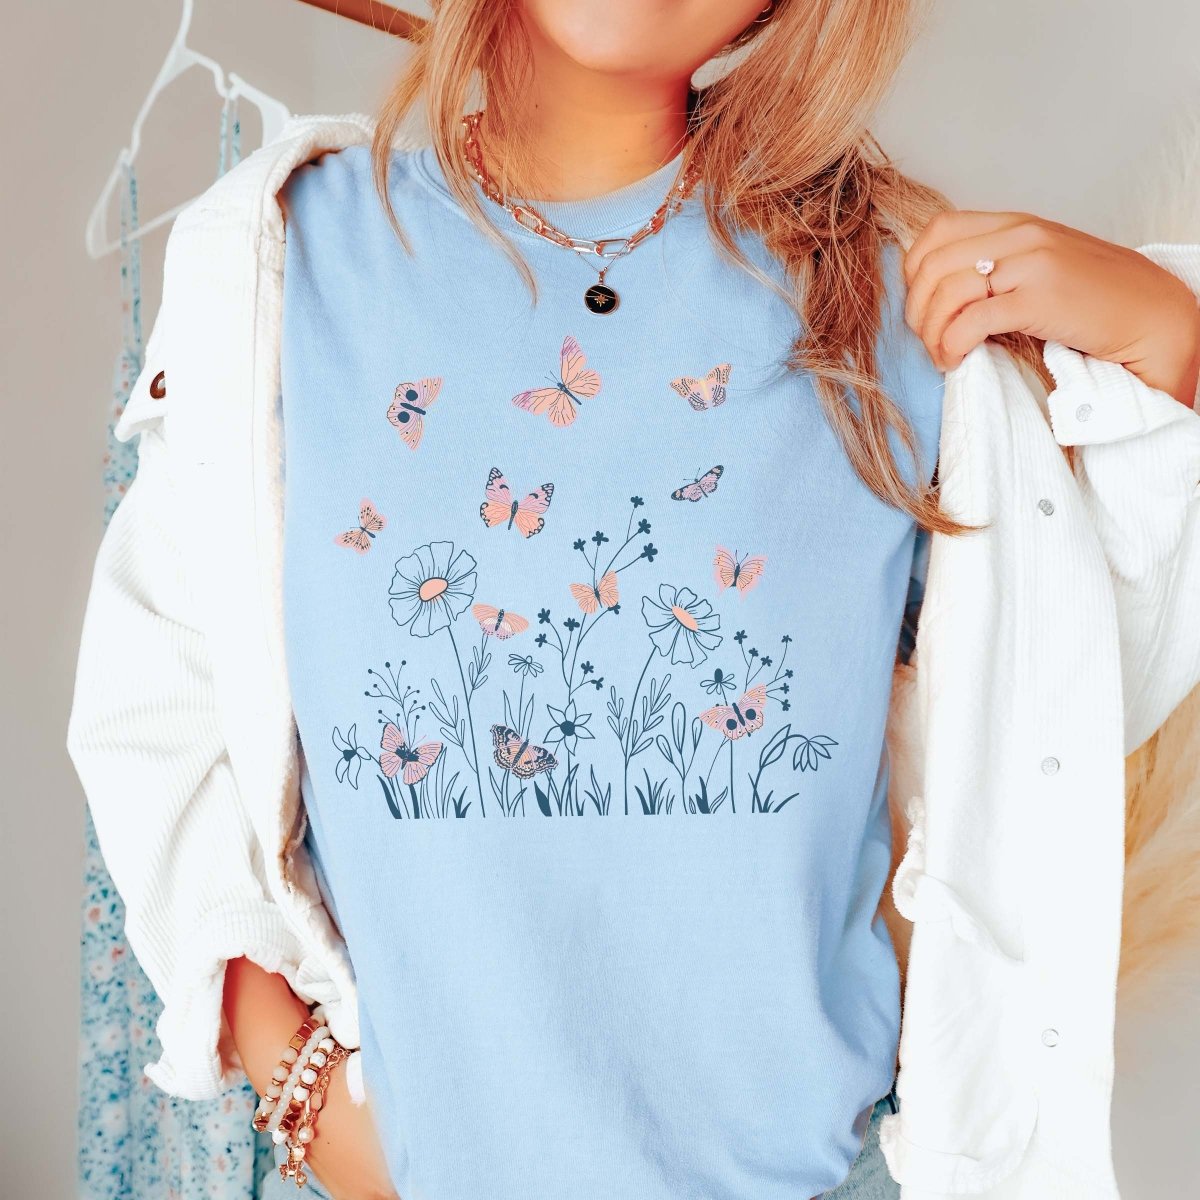 Wildflower and Butterflies Wholesale Tee - Limeberry Designs